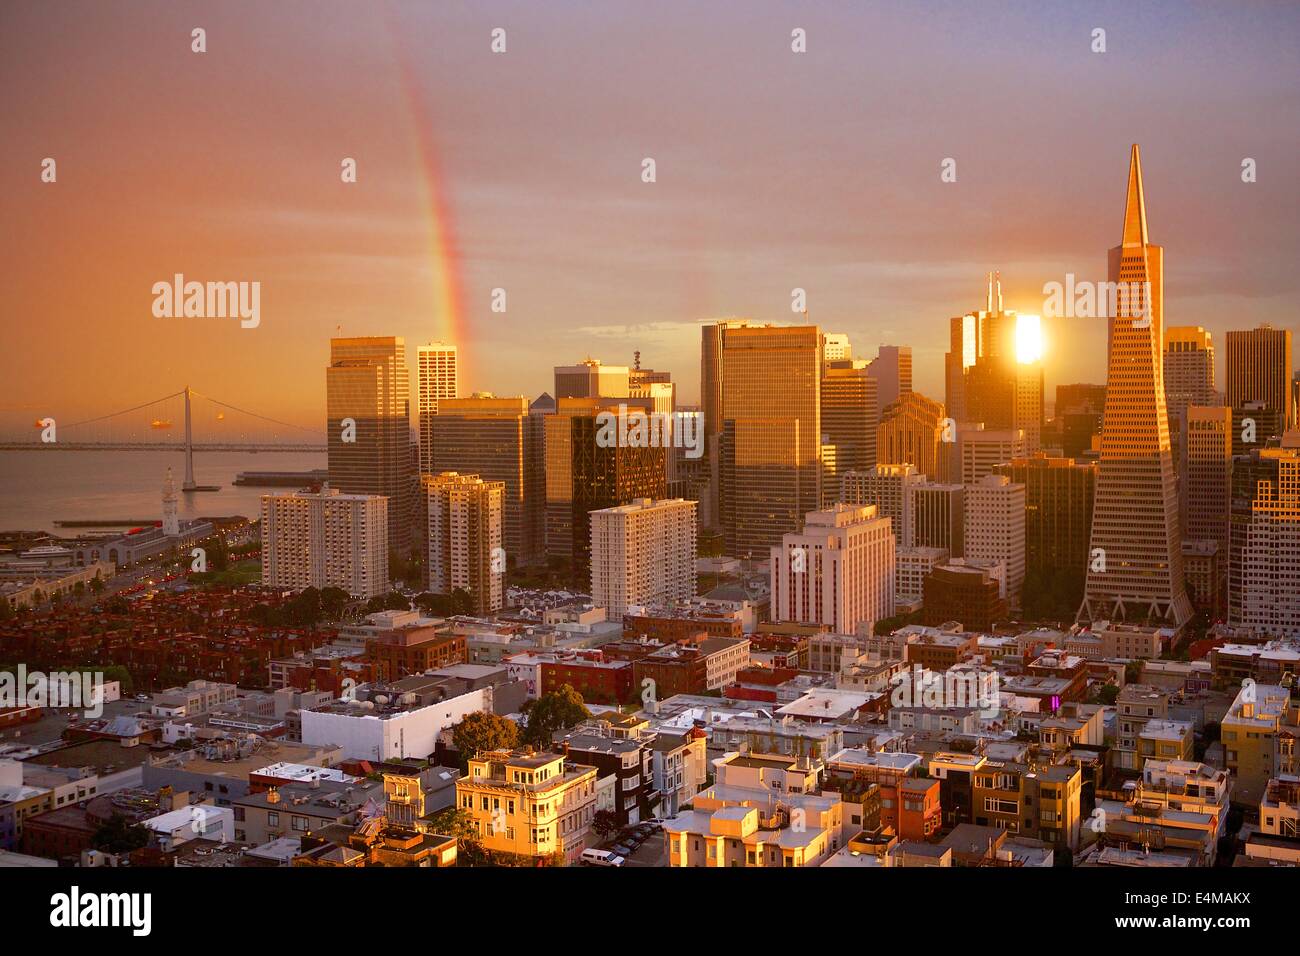 View of a lifetime: a stunning rainbow over San Francisco at sunset from Coit Tower. Stock Photo